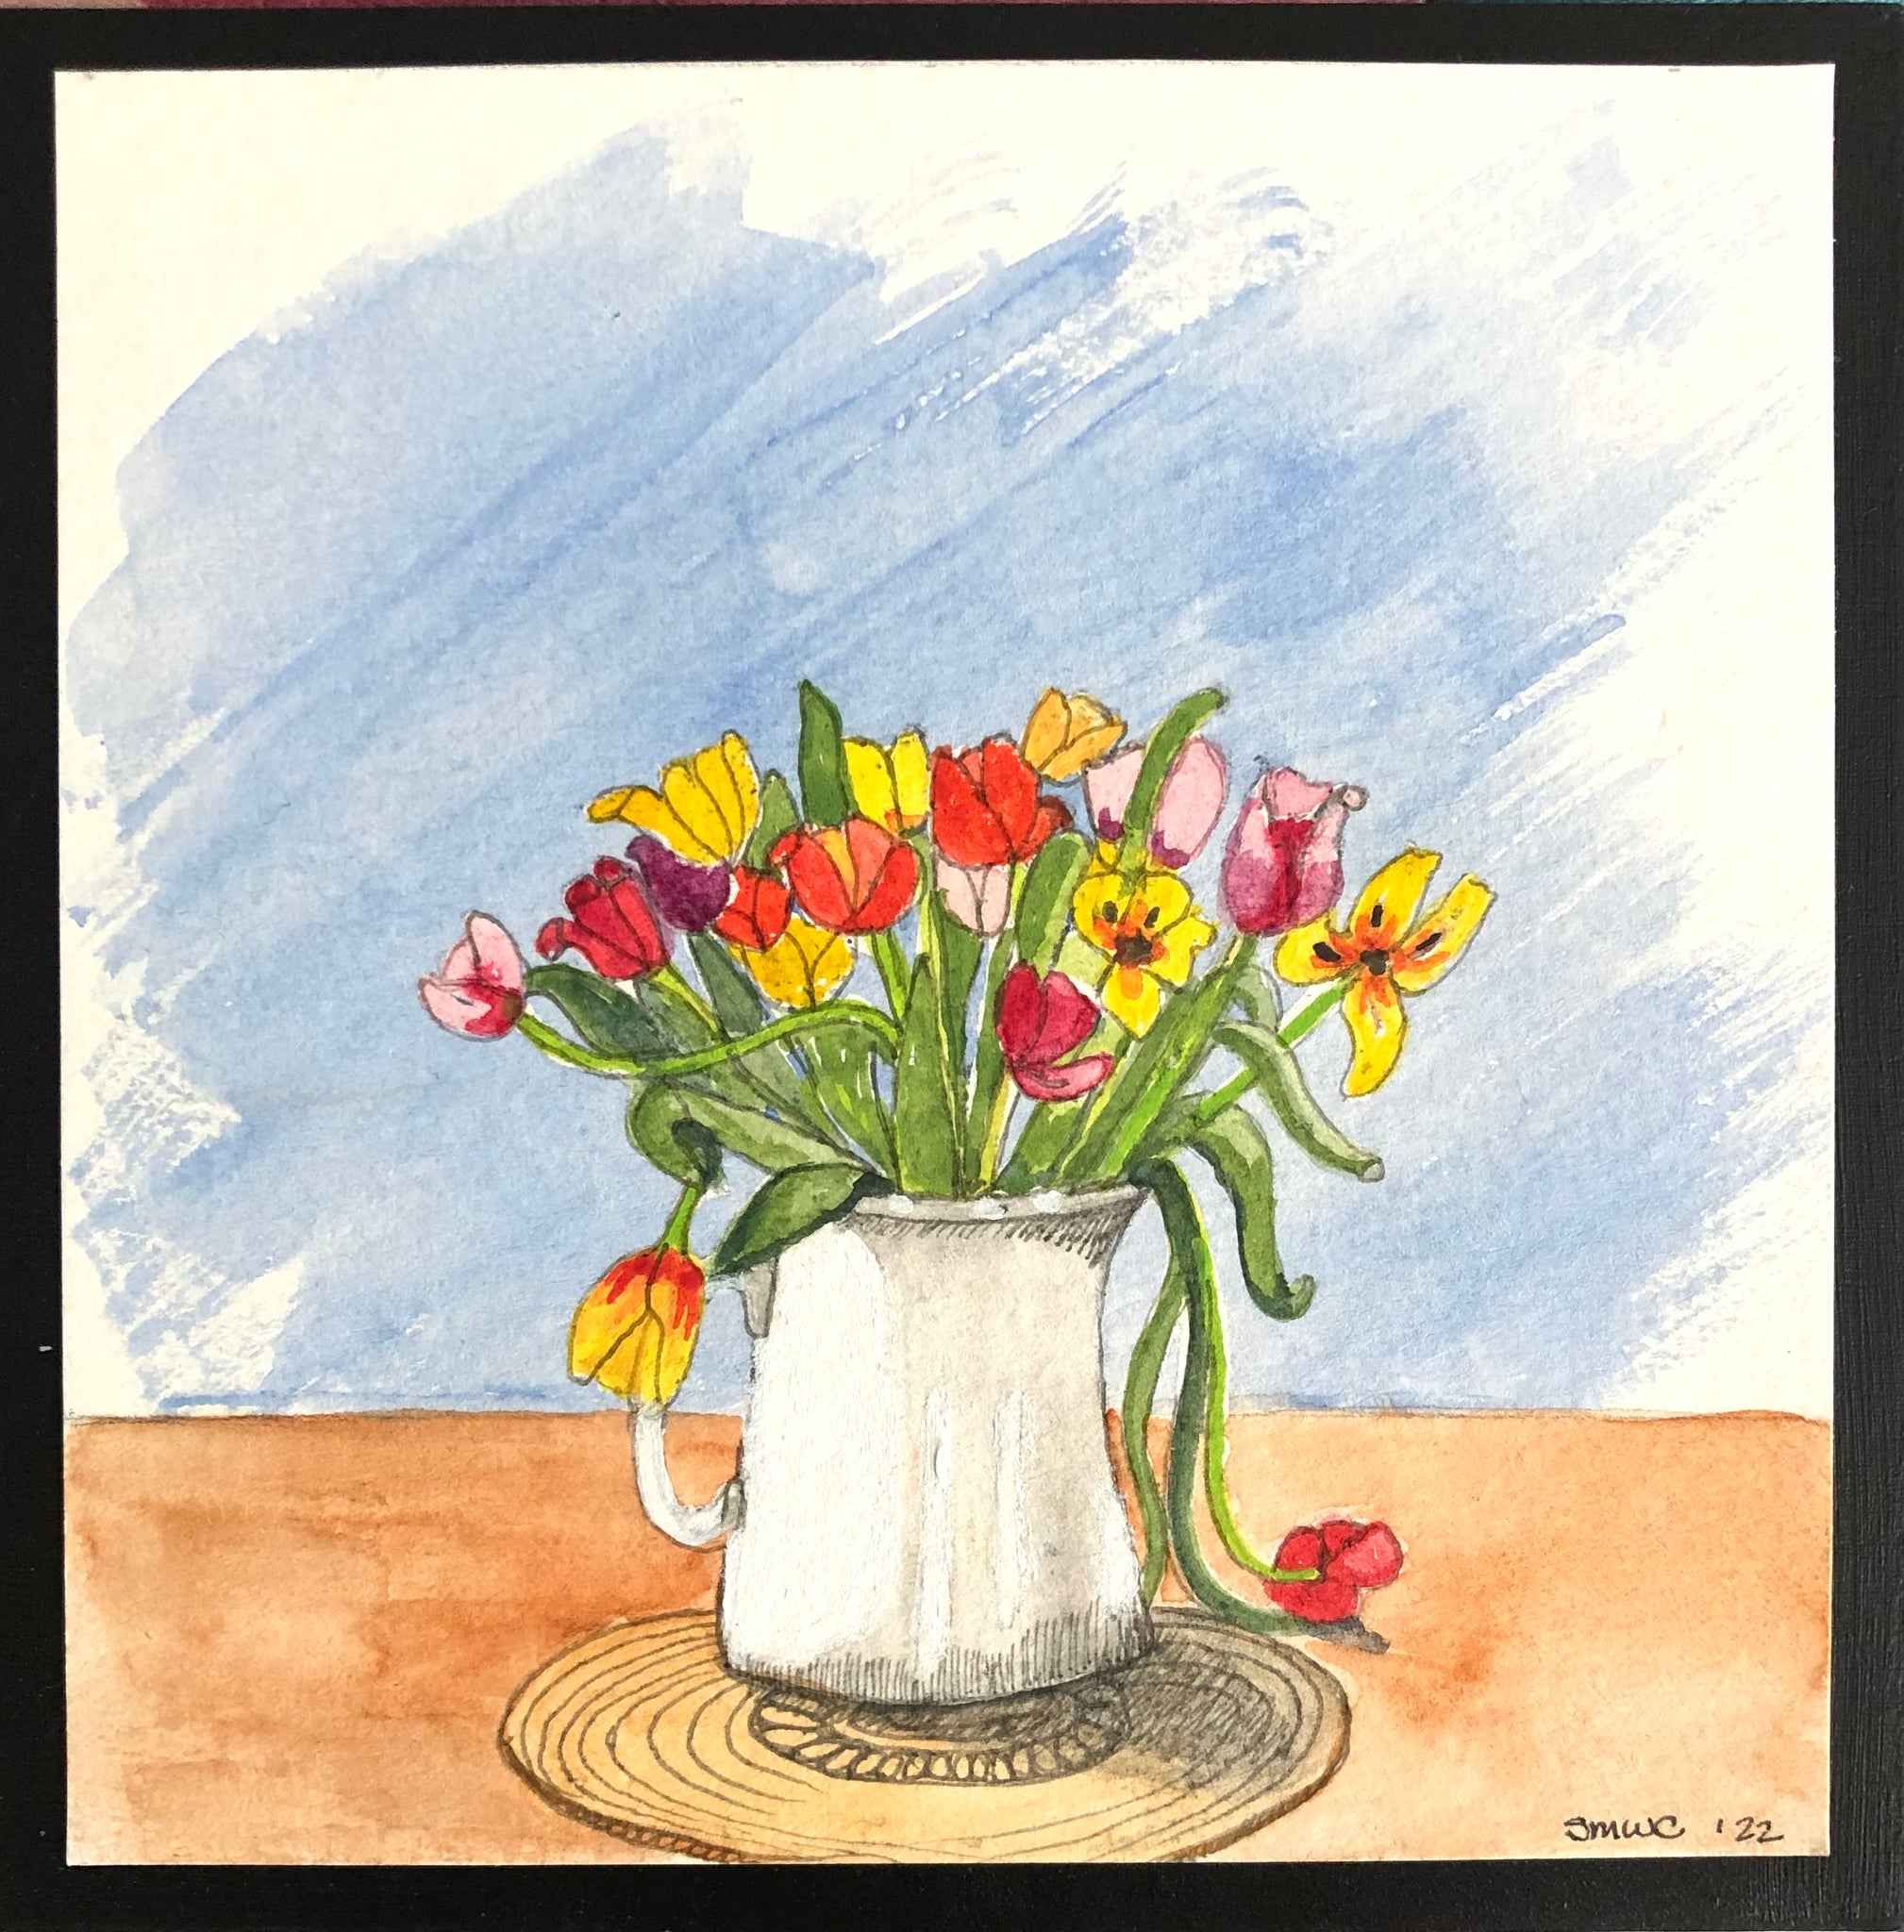 susan mw cartwright ~ Tulips On the Table